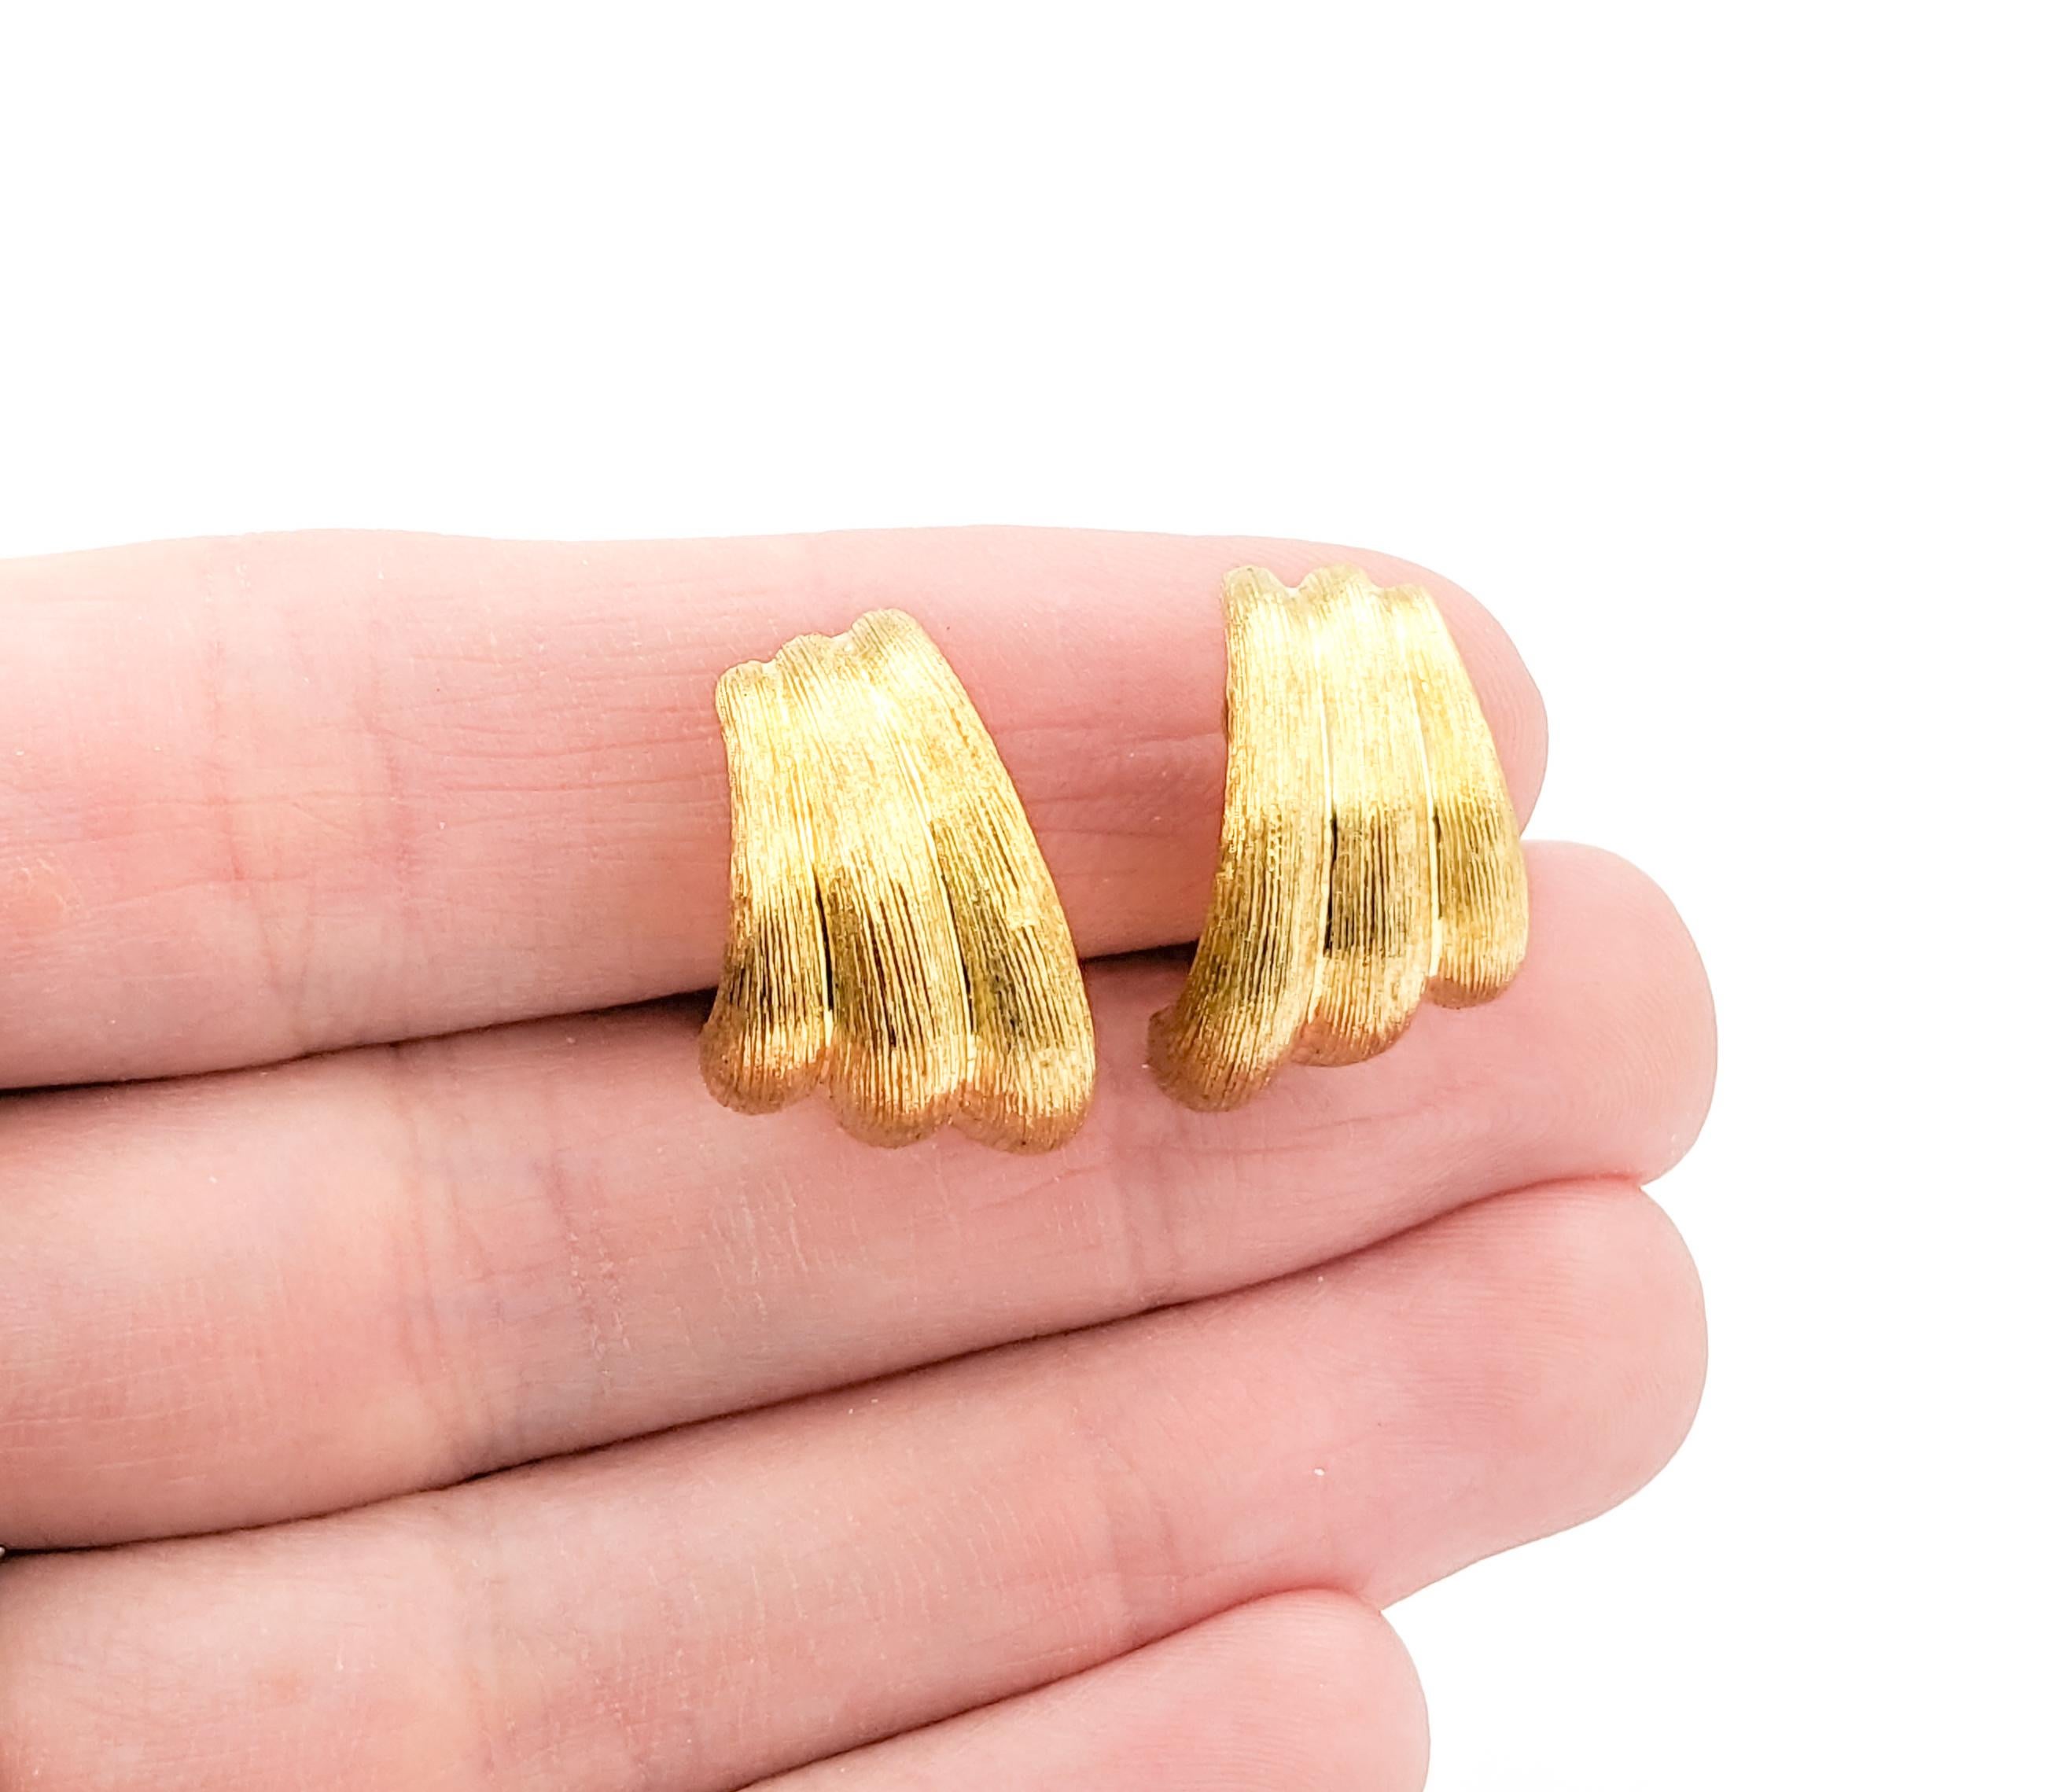 Gold Fashion Clip-on Earrings In Yellow Gold

These elegant Gold Fashion Earrings, Clip-On style, are masterfully crafted in 18k yellow gold and feature a stunning hand-florentined finish that adds depth and a luxurious texture to the design. The